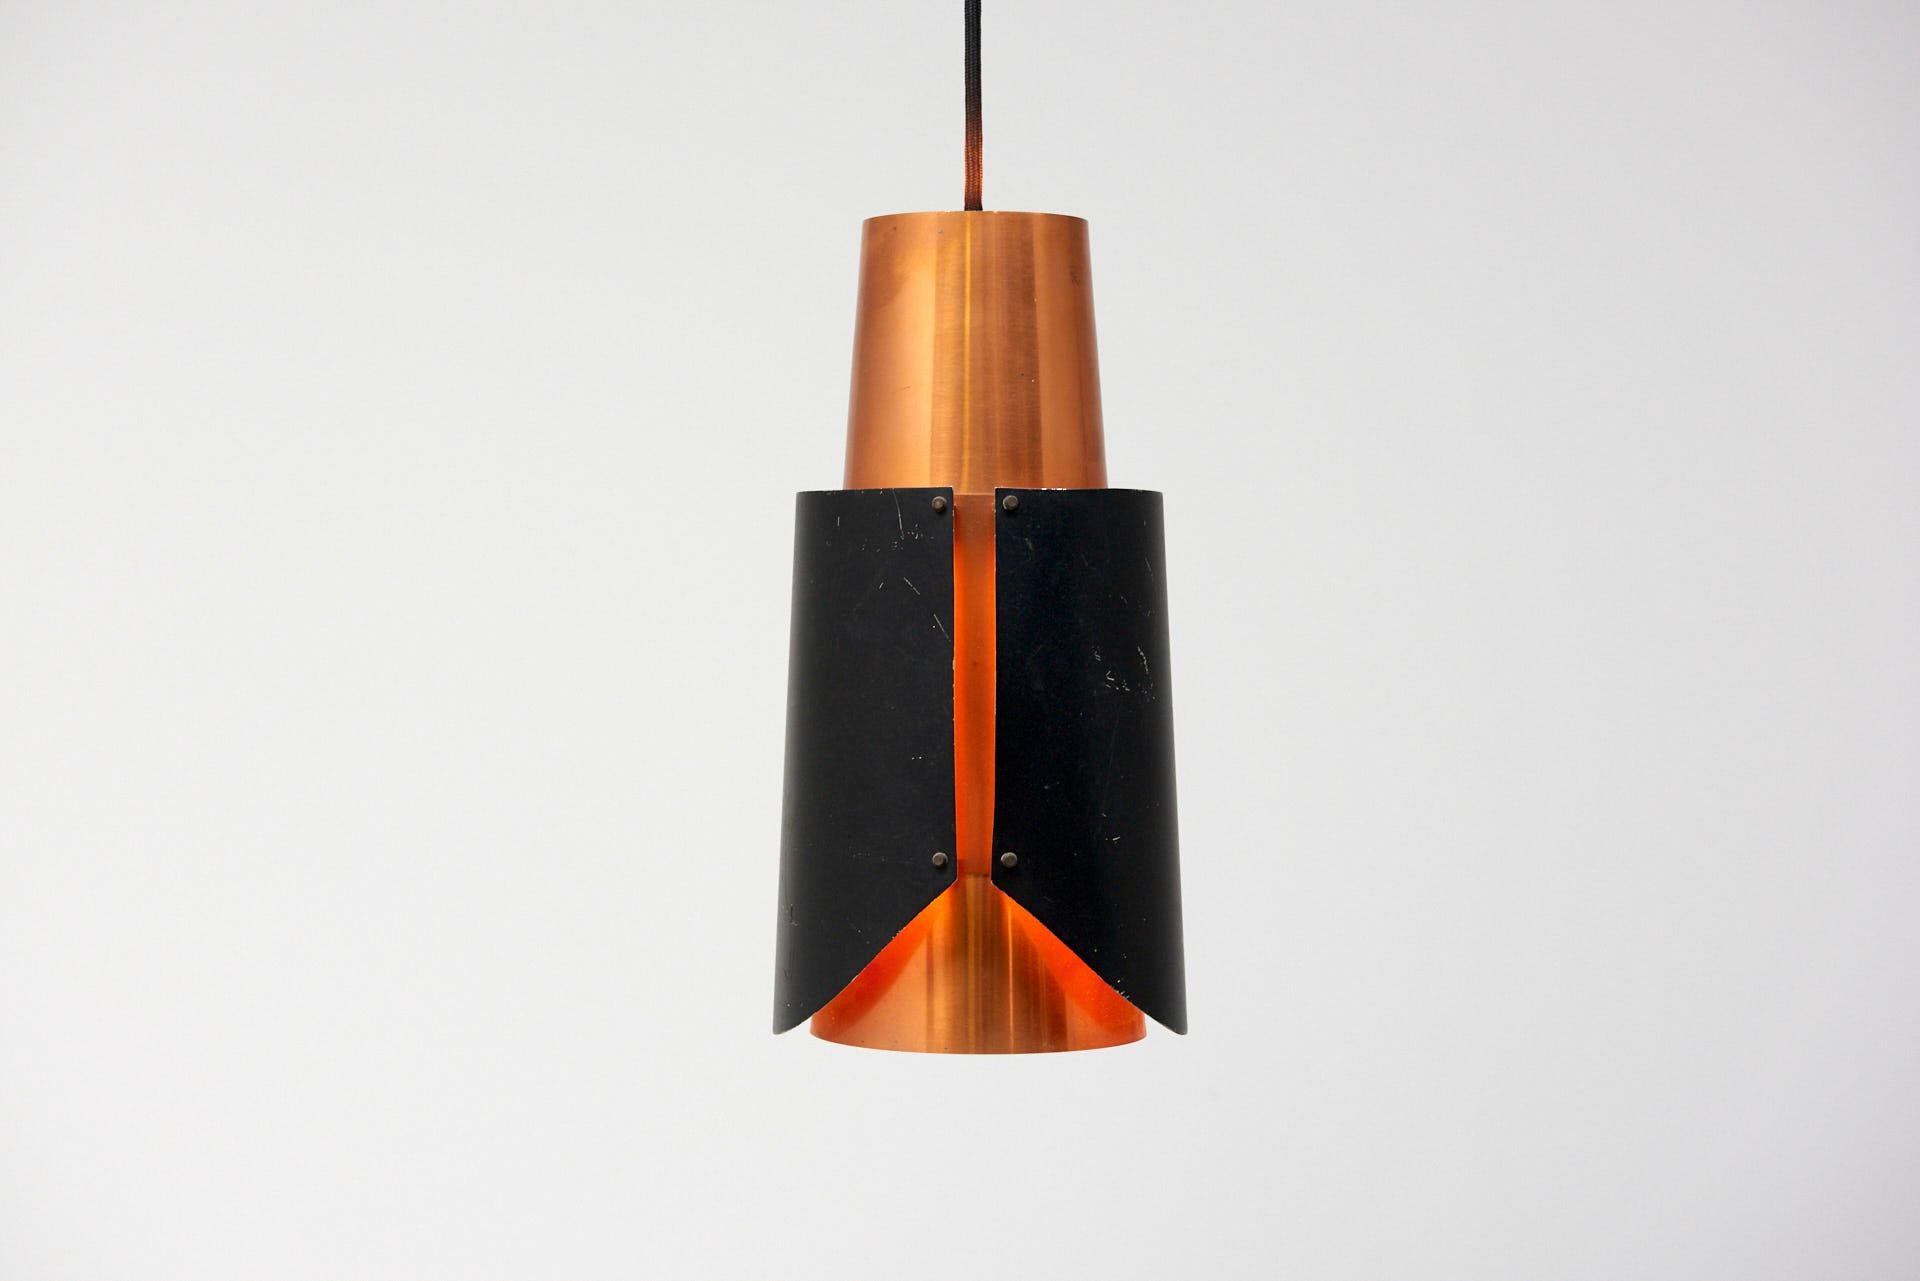 A pair of conical pendant lamps in black lacquered metal and red copper. Design by Bernt Karlby for Lyfa. Made in Denmark.
Traces of wear, minor scratches as shown in the pictures.